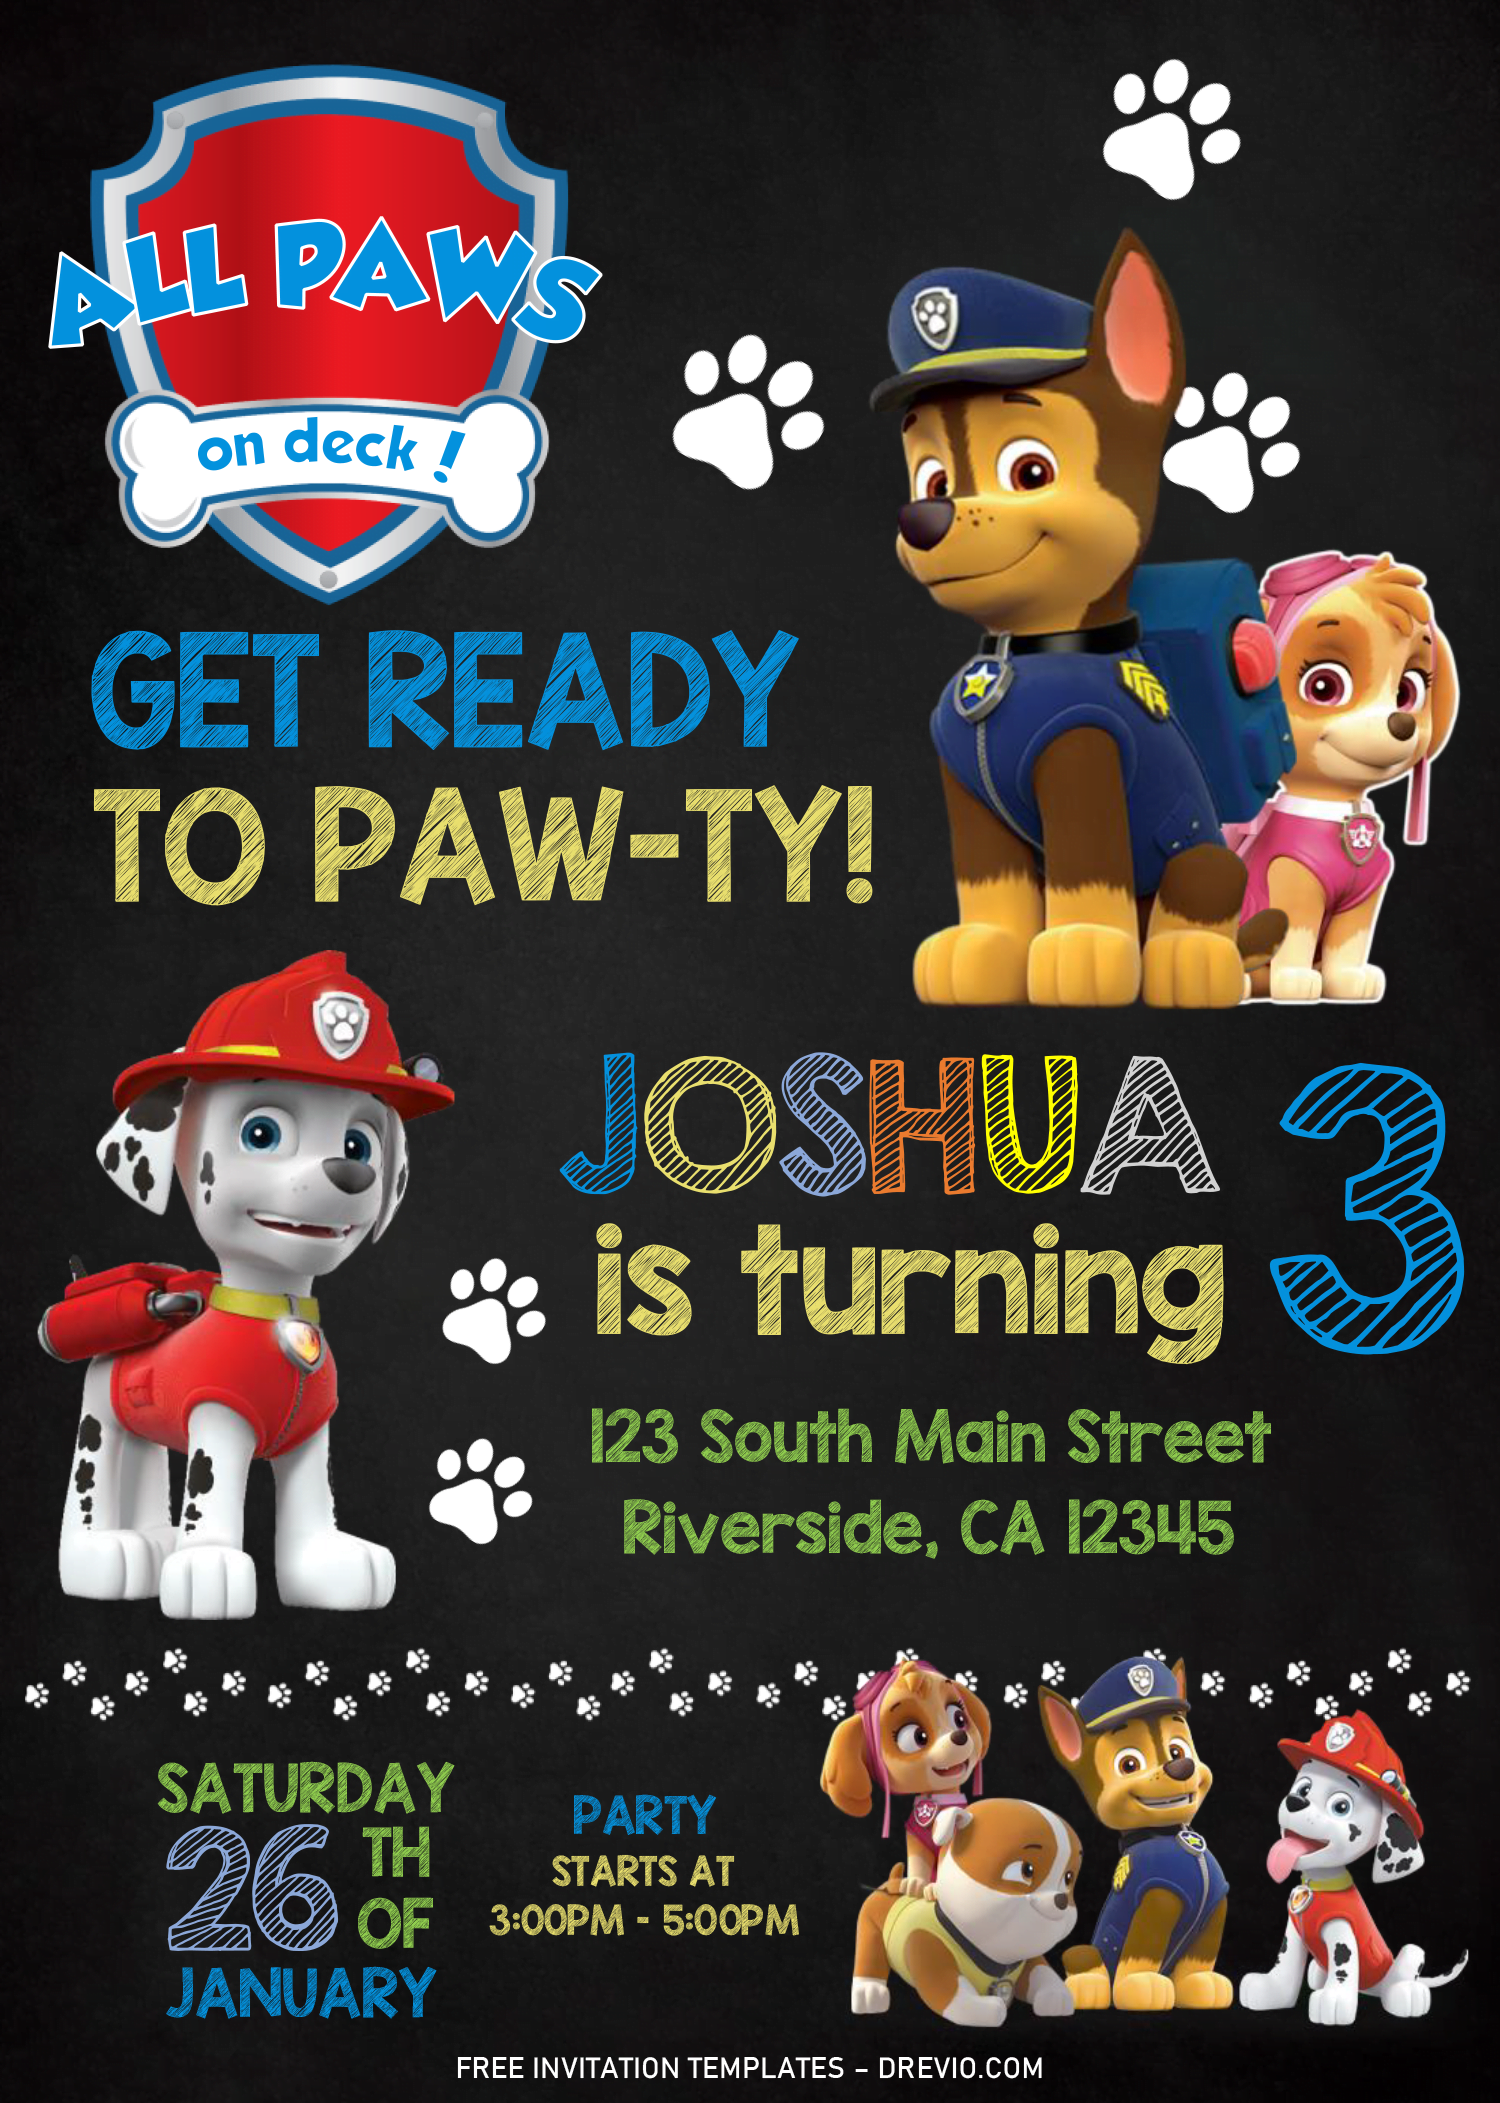 free-chalkboard-paw-patrol-invitation-templates-editable-with-ms-word-download-hundreds-free